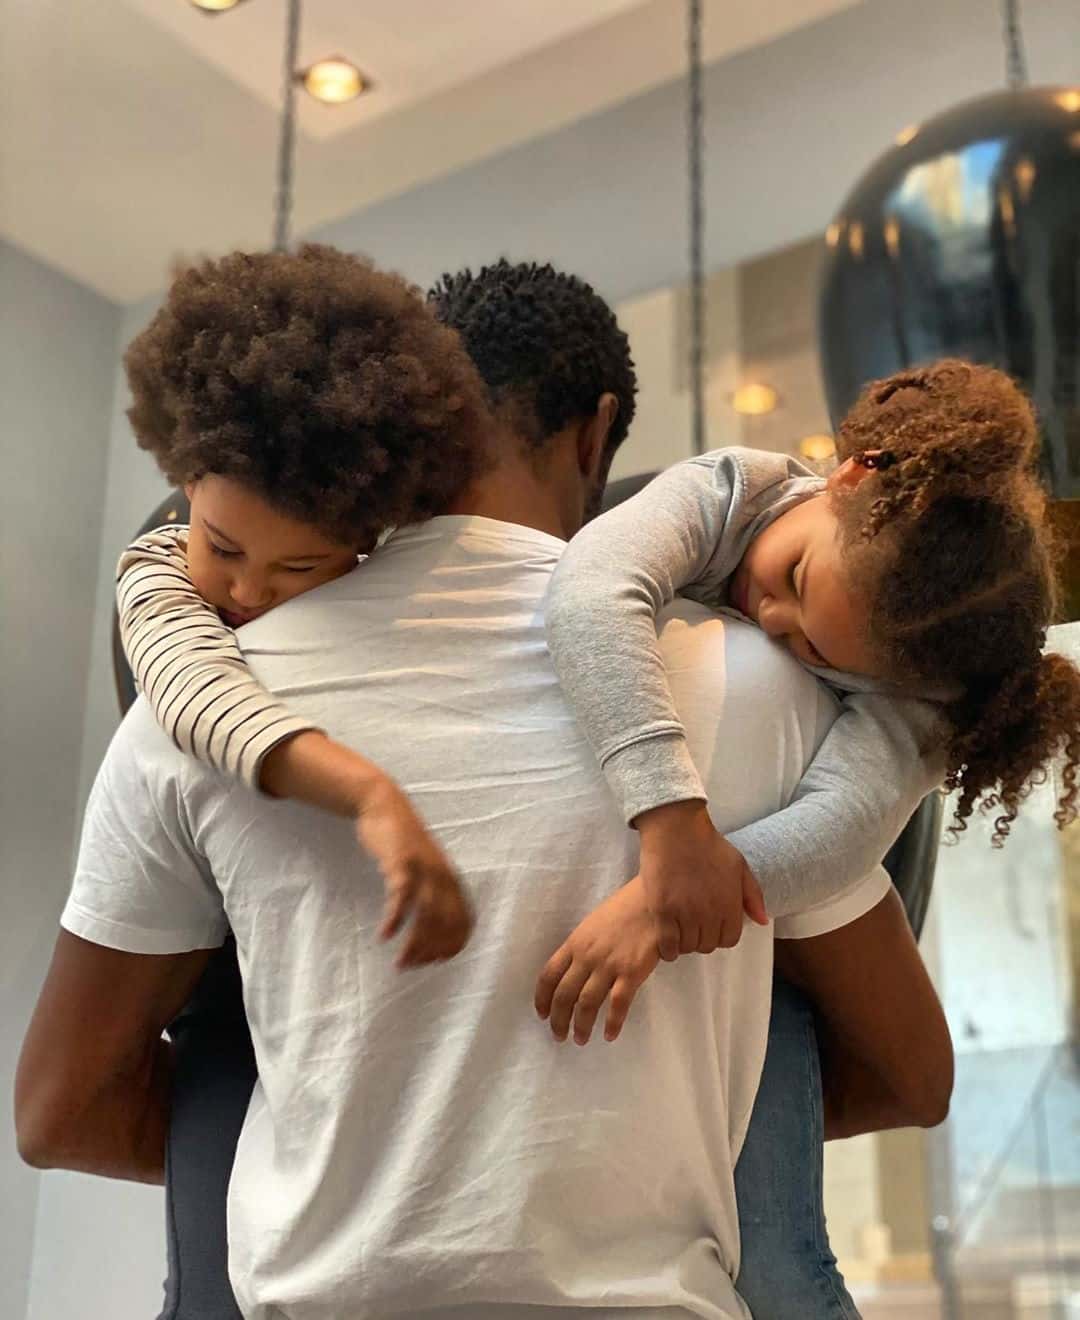 "At the end of the day, that's all that matters" - Mikel Obi shows off beautiful twin daughters